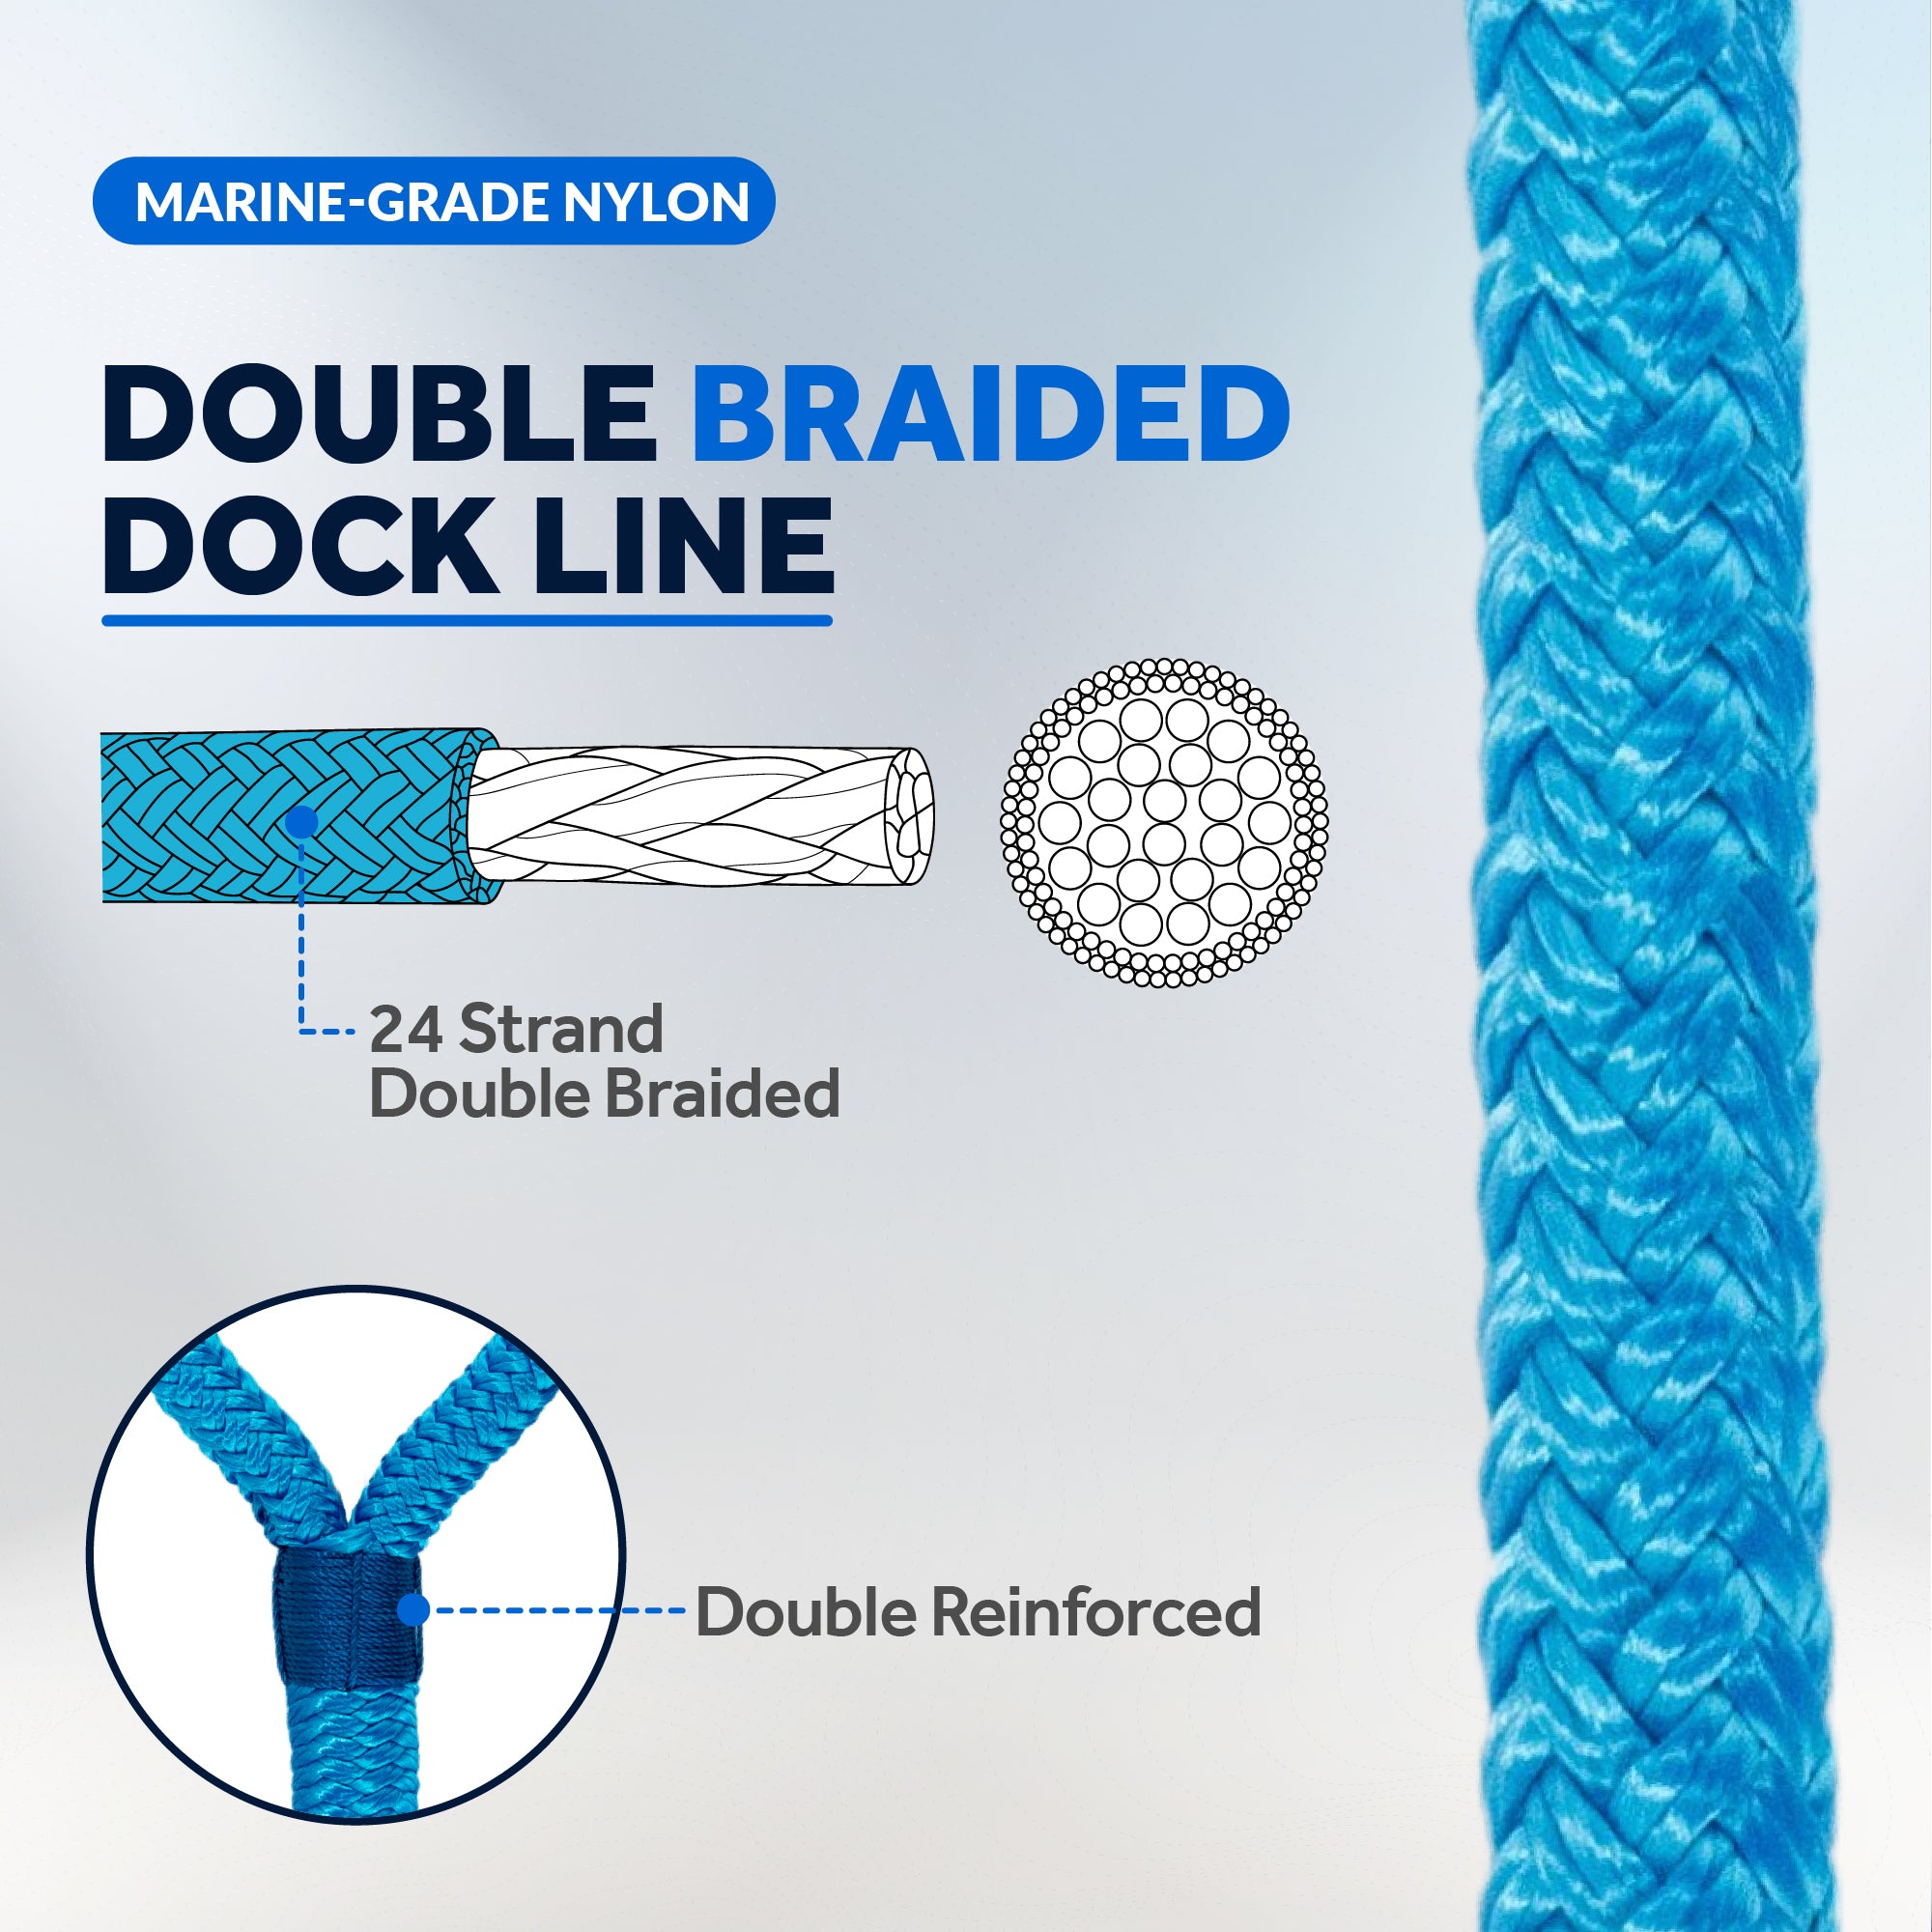 Dock Lines, 1/2" x 20', Light Blue Nylon Double Braided with 12" Eyelet, 4-Pack - FO4621-M4